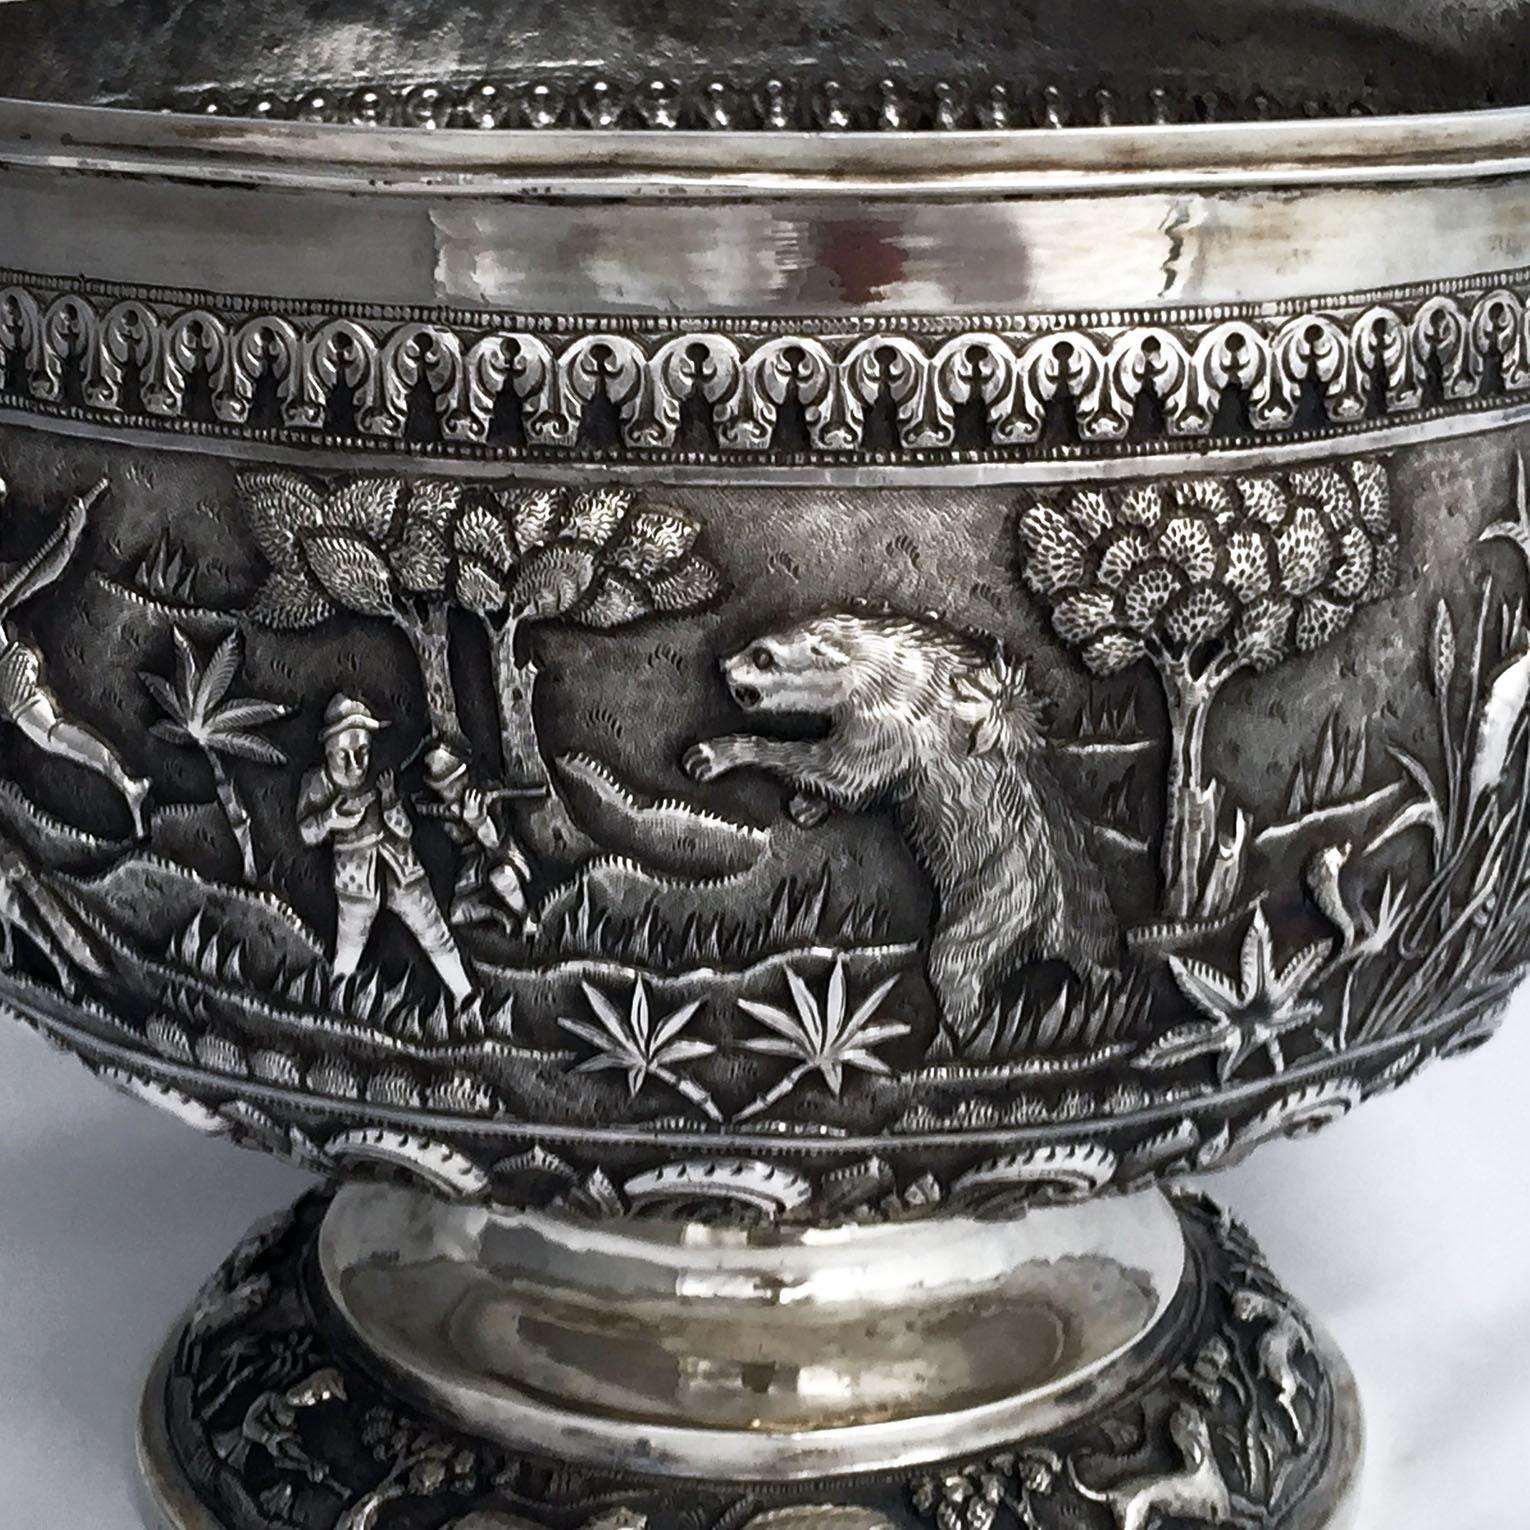 A late 19th century Indian silver punch bowl made for the British Raj - which makes the ultimate champagne cooler.

Each continent is represented in the hunting scenes repousse worked around the raised body. - look out for the Red Indian from the